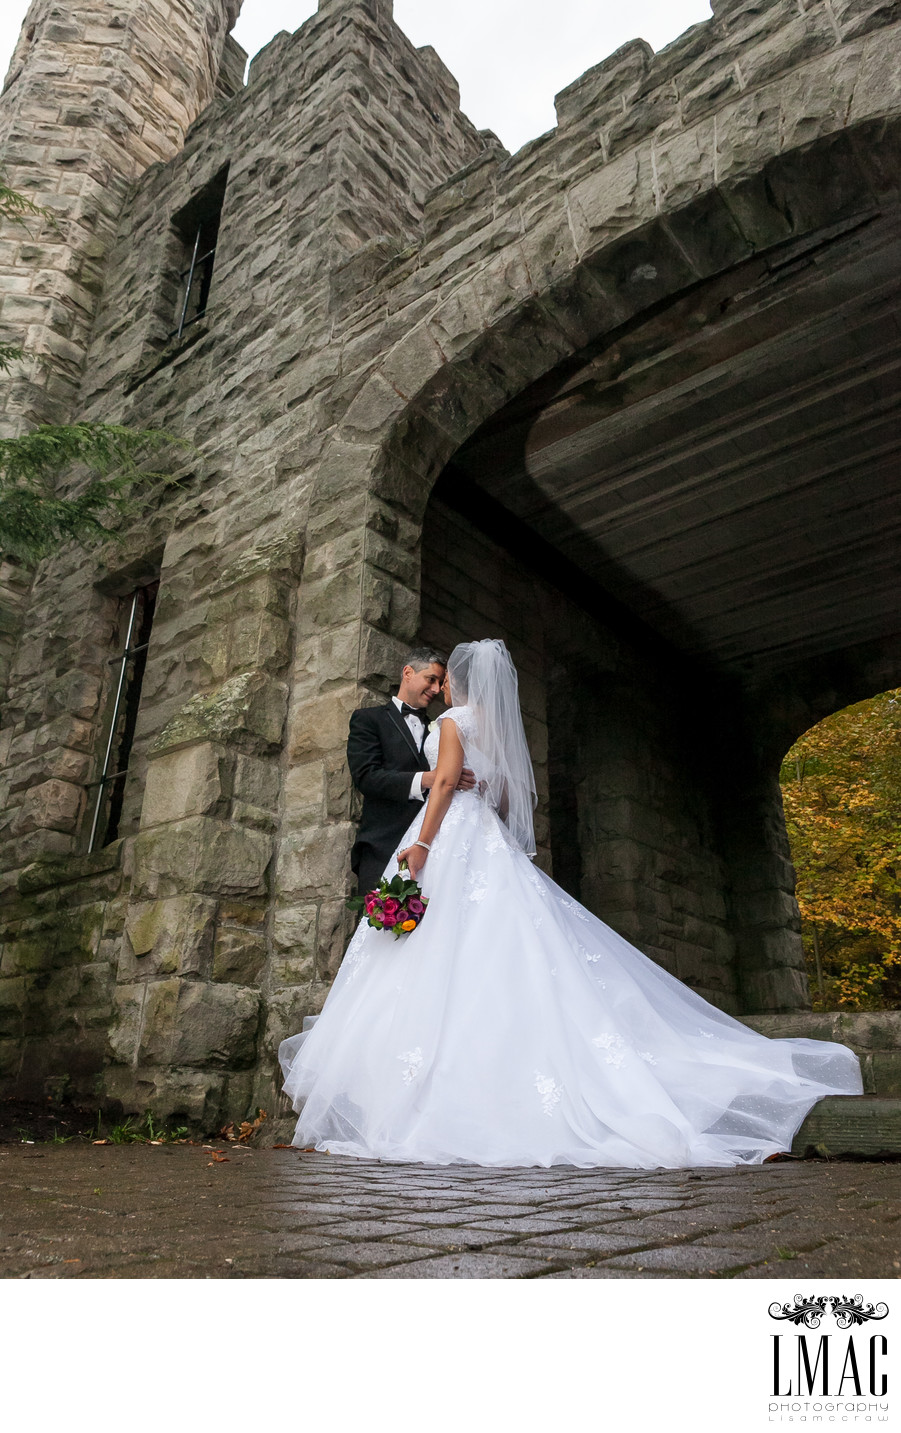 A Beautiful Bride and Groom at Squire's Castle